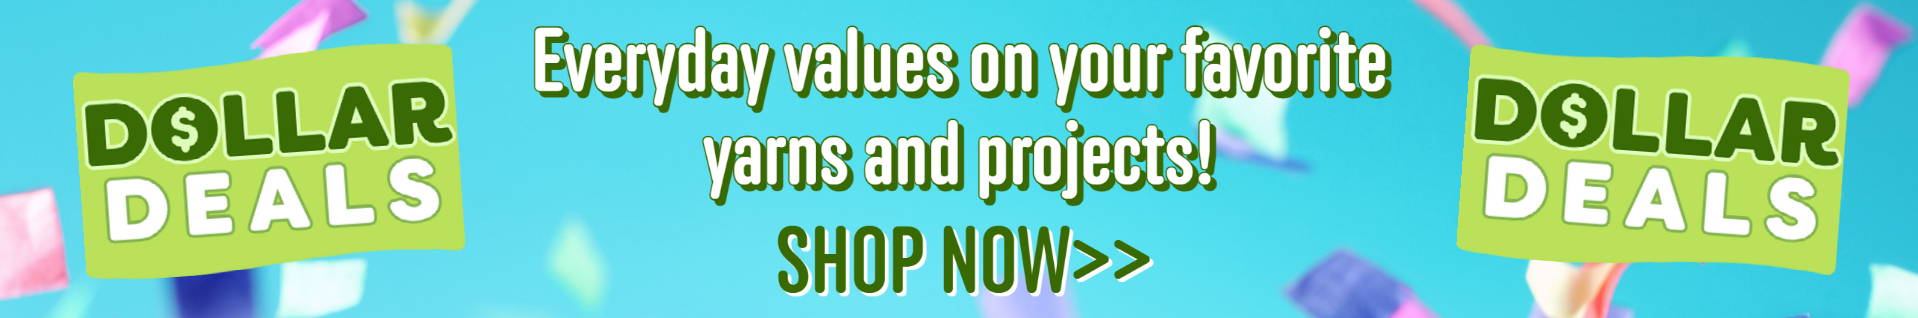 Dollar Deals Everyday values on your favorite yarns and projects! Shop Now. 